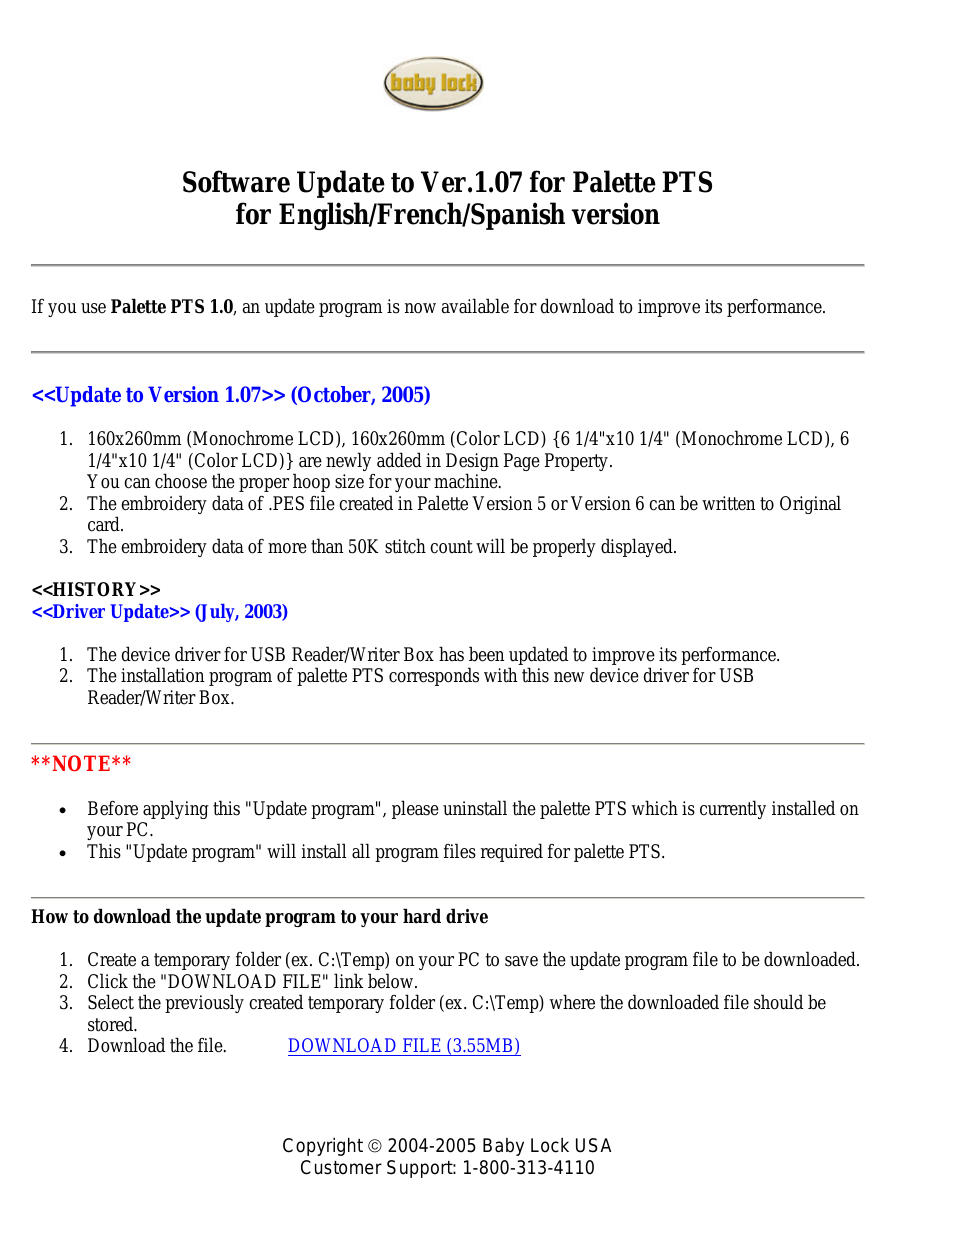 Palette 5.61 (ф) Update For Windows XP/2000 Instructions